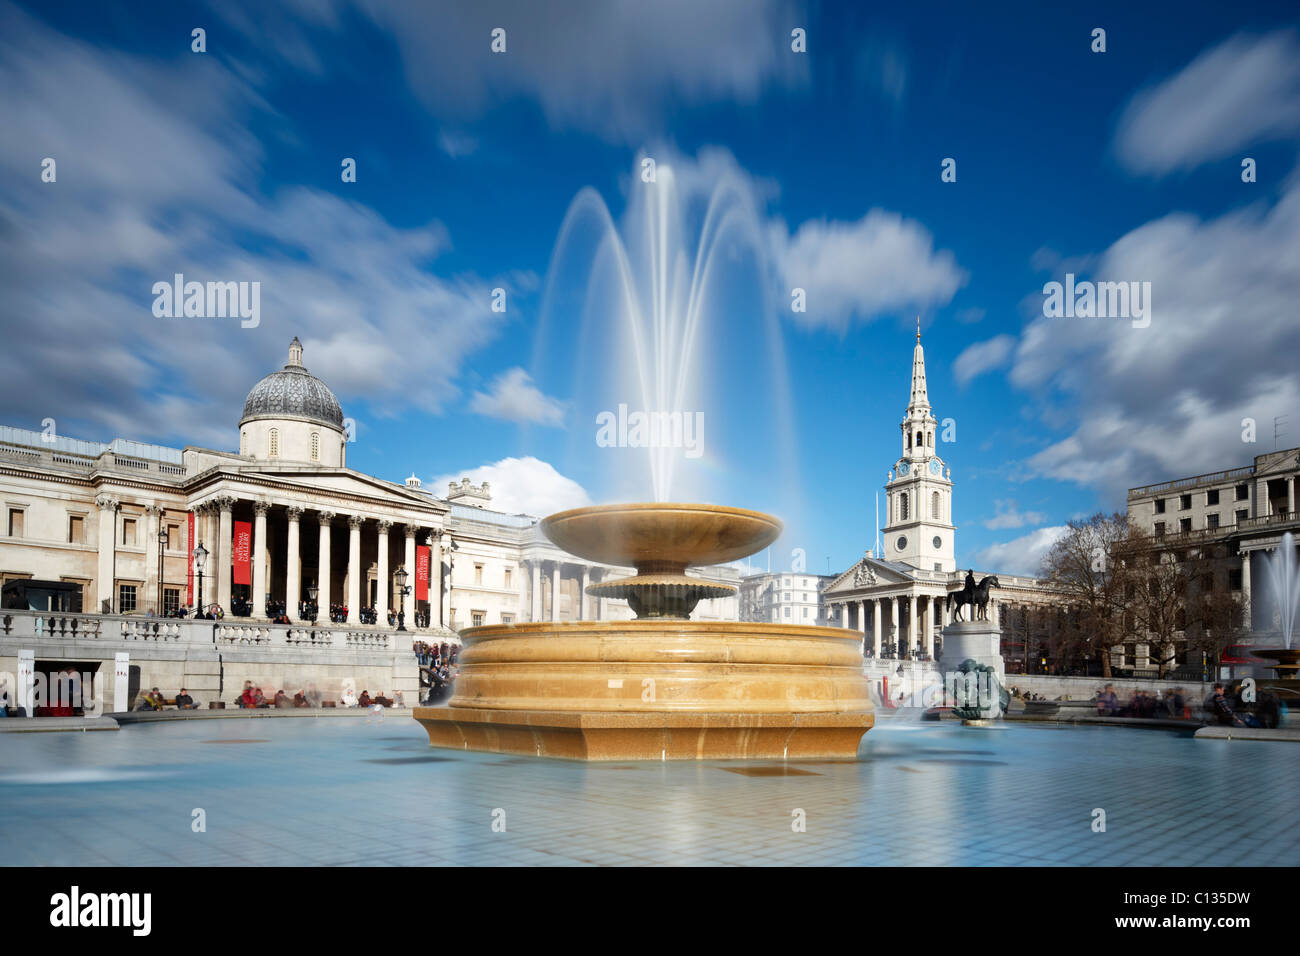 Trafalgar Square - Central London. Long exposure rendering movement in both the fountains and cloud cover. Stock Photo